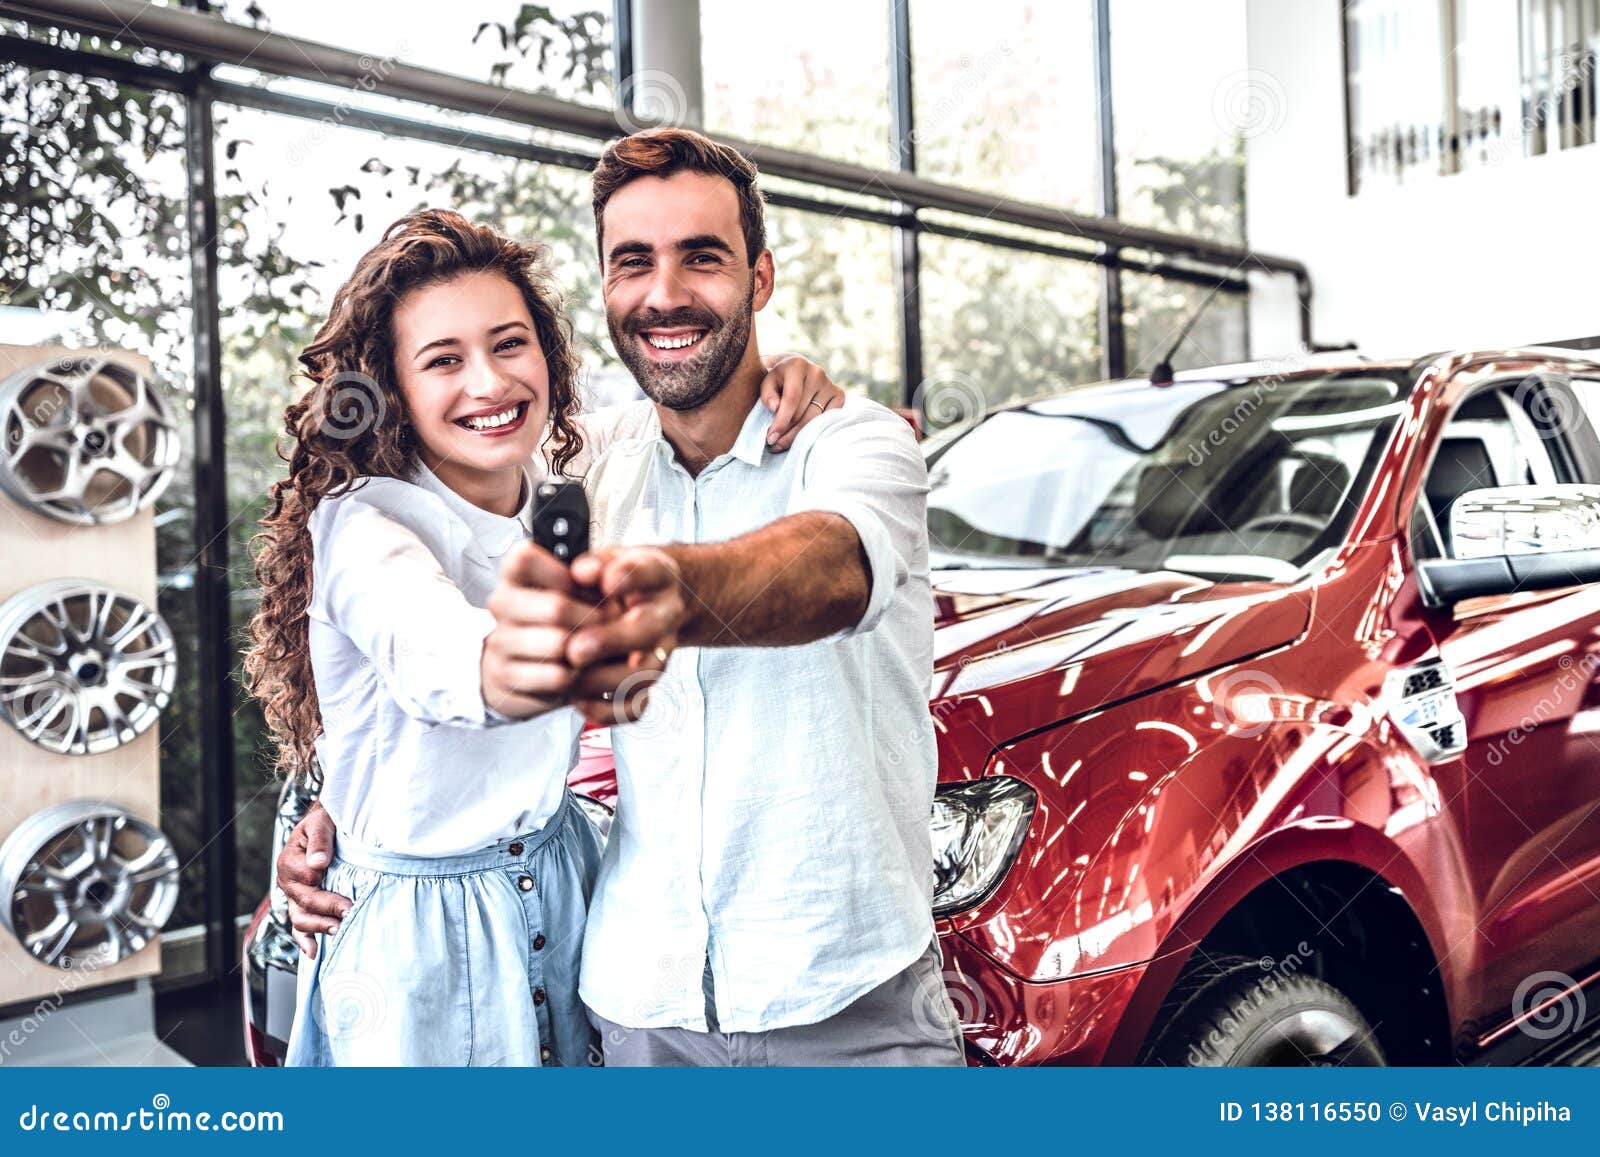 portrait of a happy young couple hugging in a car salon showing car keys to a newly bought vehicle